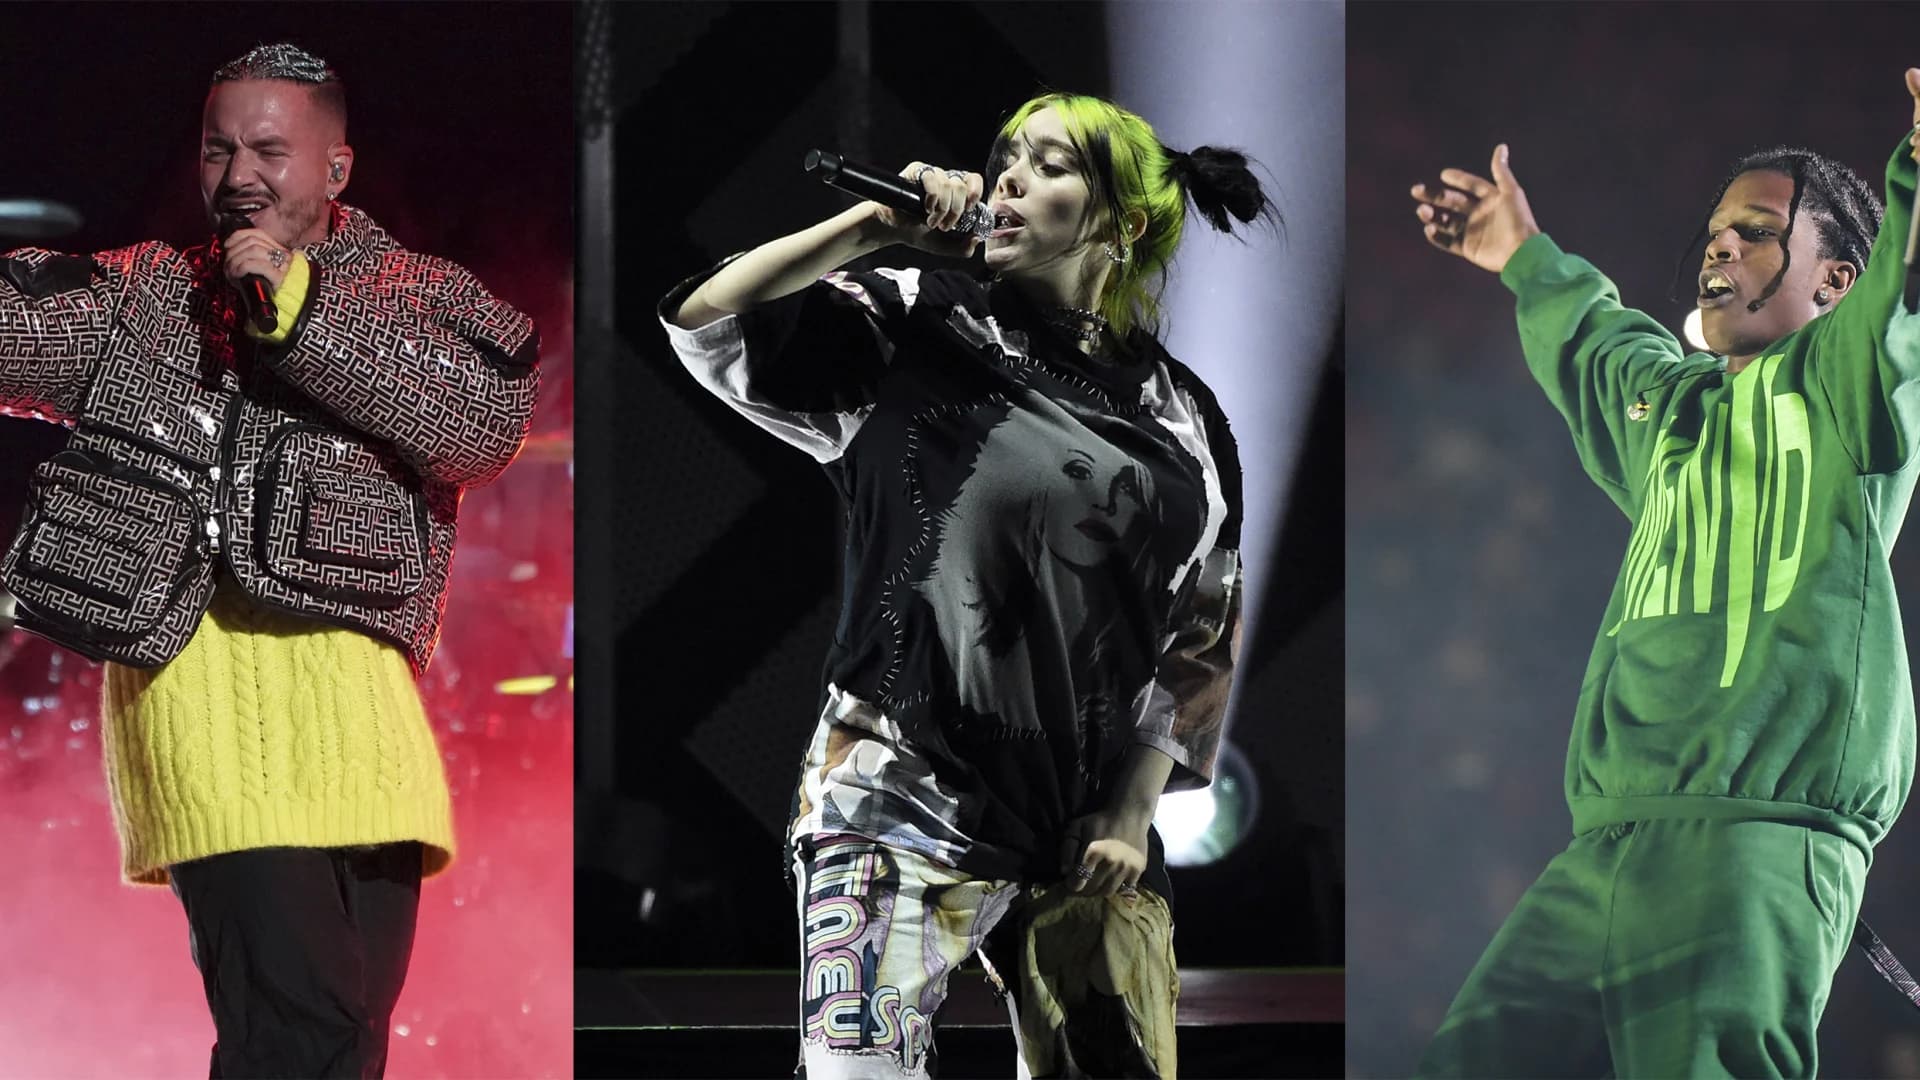 Billie Eilish, A$ap Rocky, Post Malone headline Governors Ball at Citi Field this fall